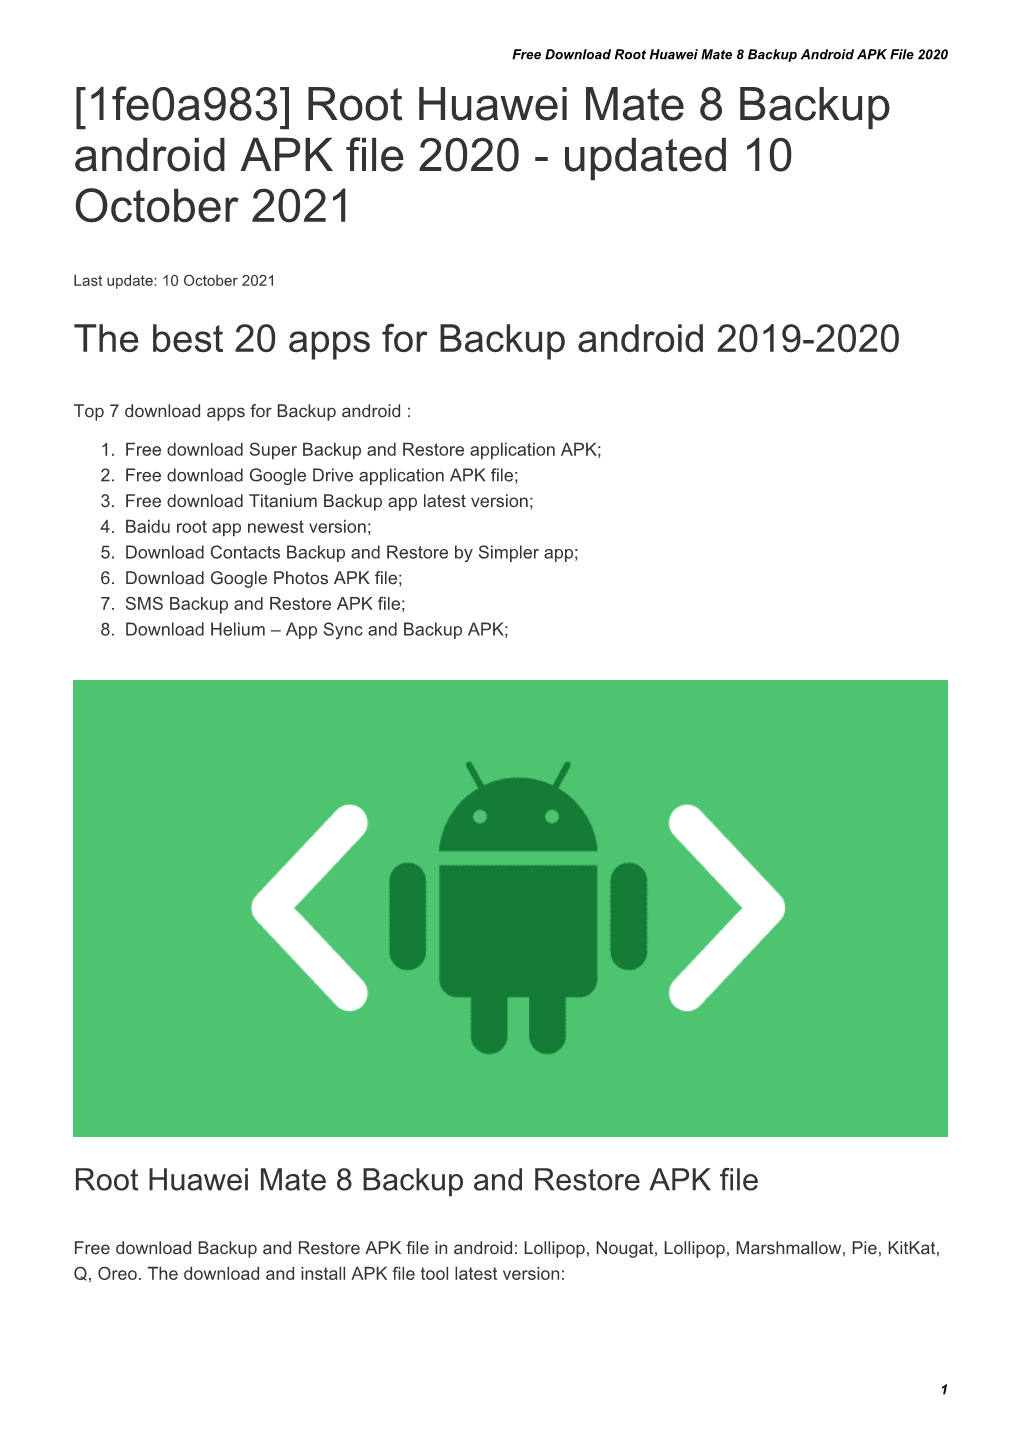 Root Huawei Mate 8 Backup Android APK File 2020 [1Fe0a983] Root Huawei Mate 8 Backup Android APK File 2020 - Updated 10 October 2021